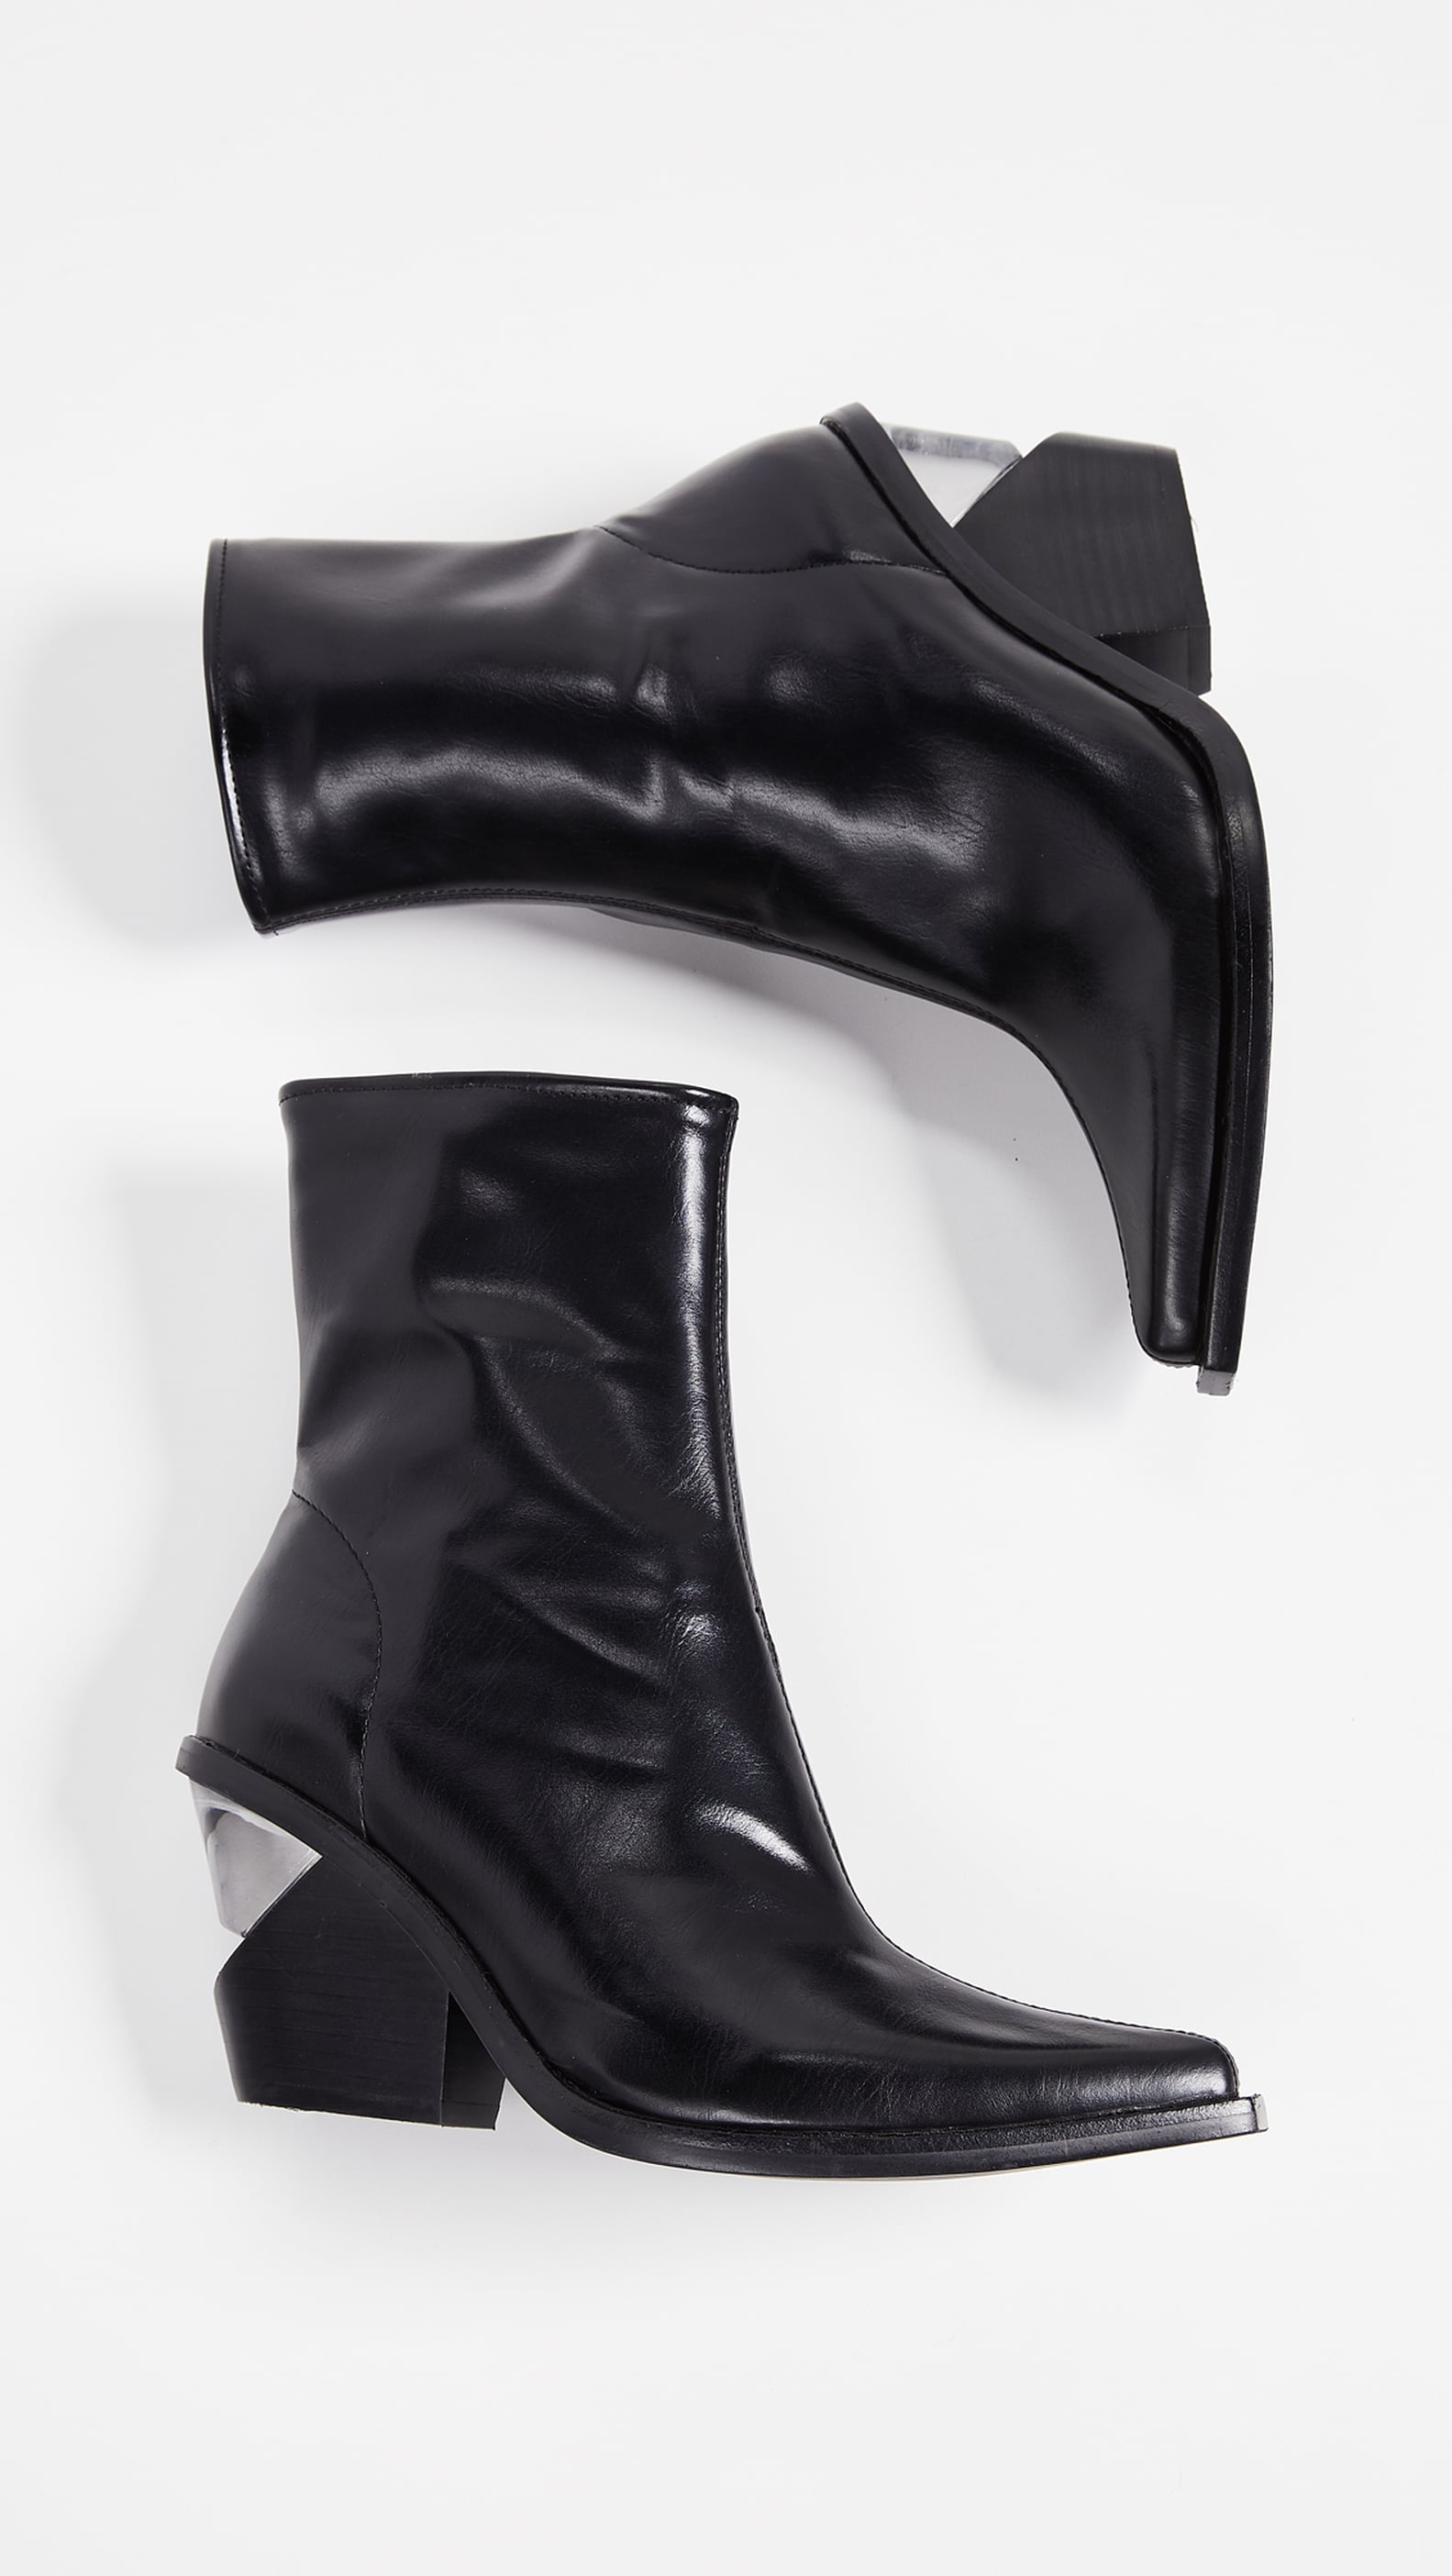 Best Cheap Leather Boots For Women | POPSUGAR Fashion